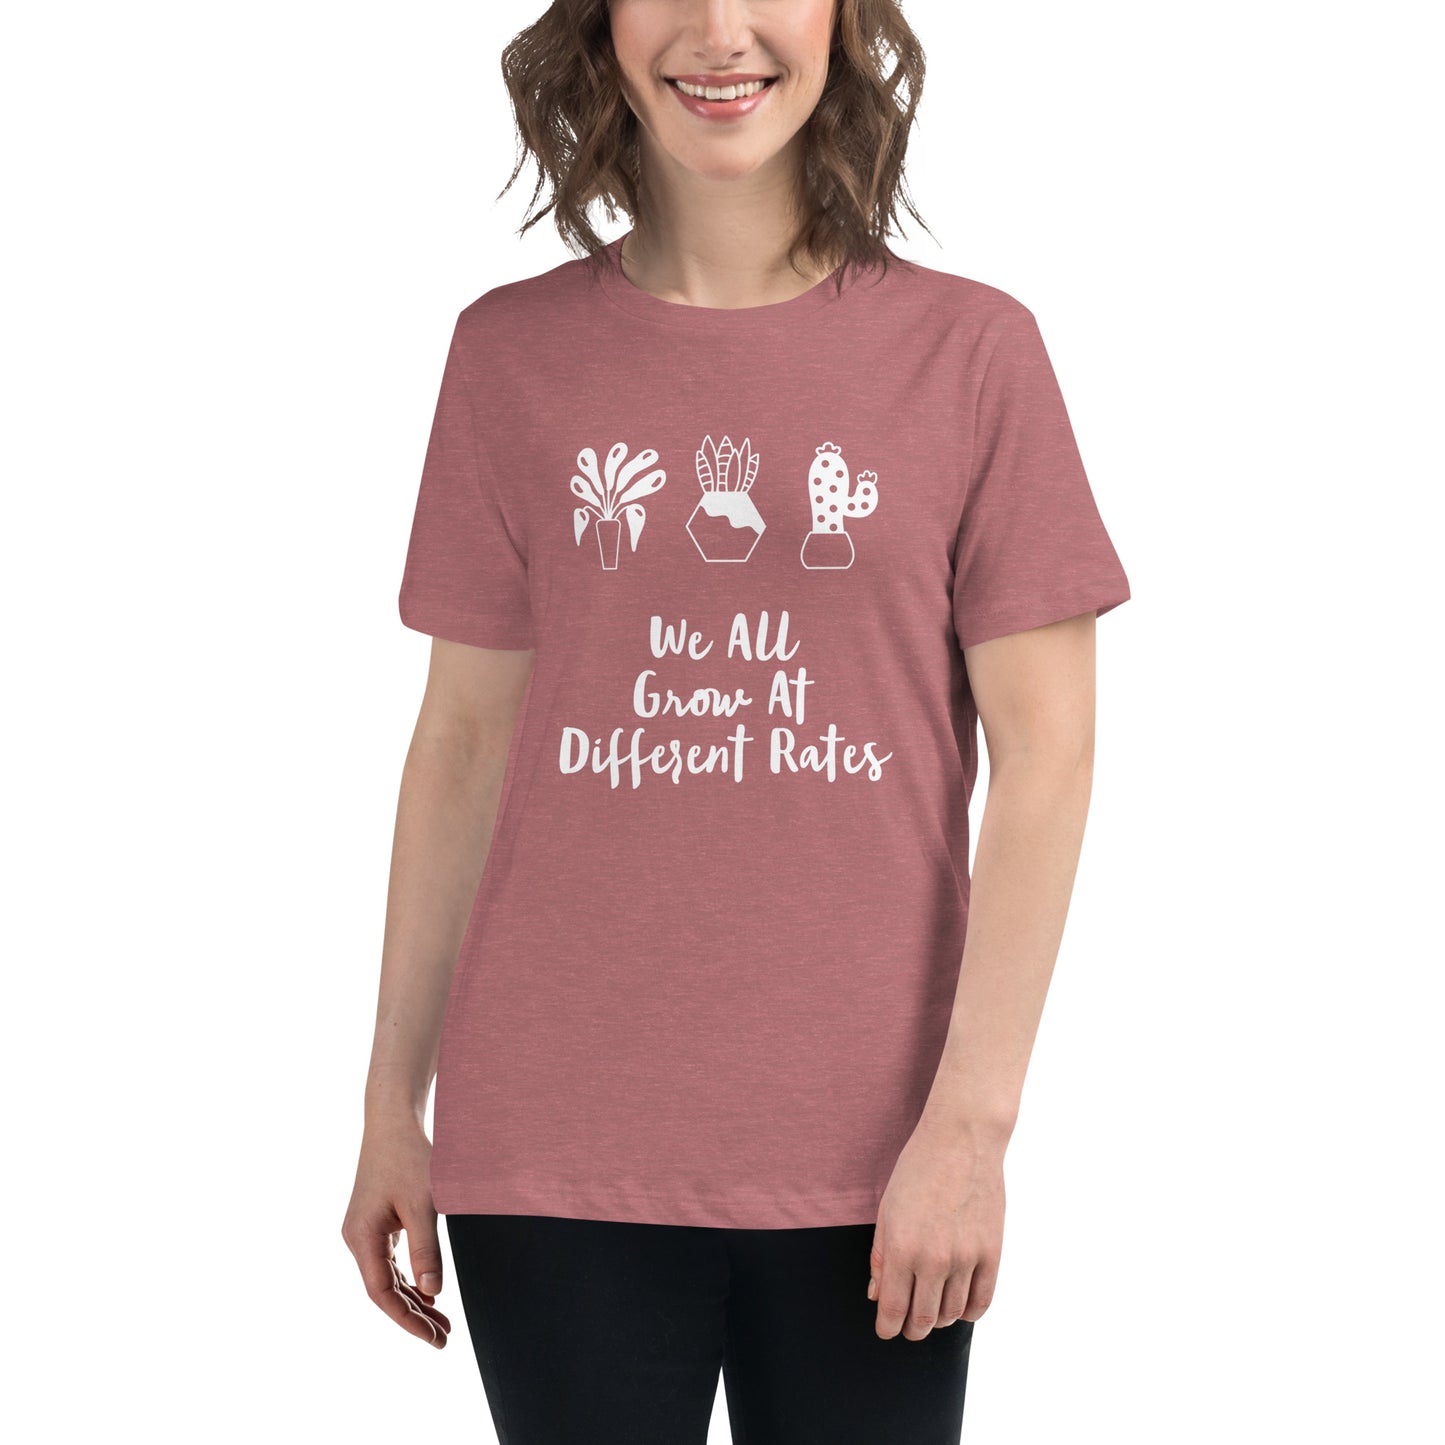 We All Grow At Different Rates Printed T-Shirt